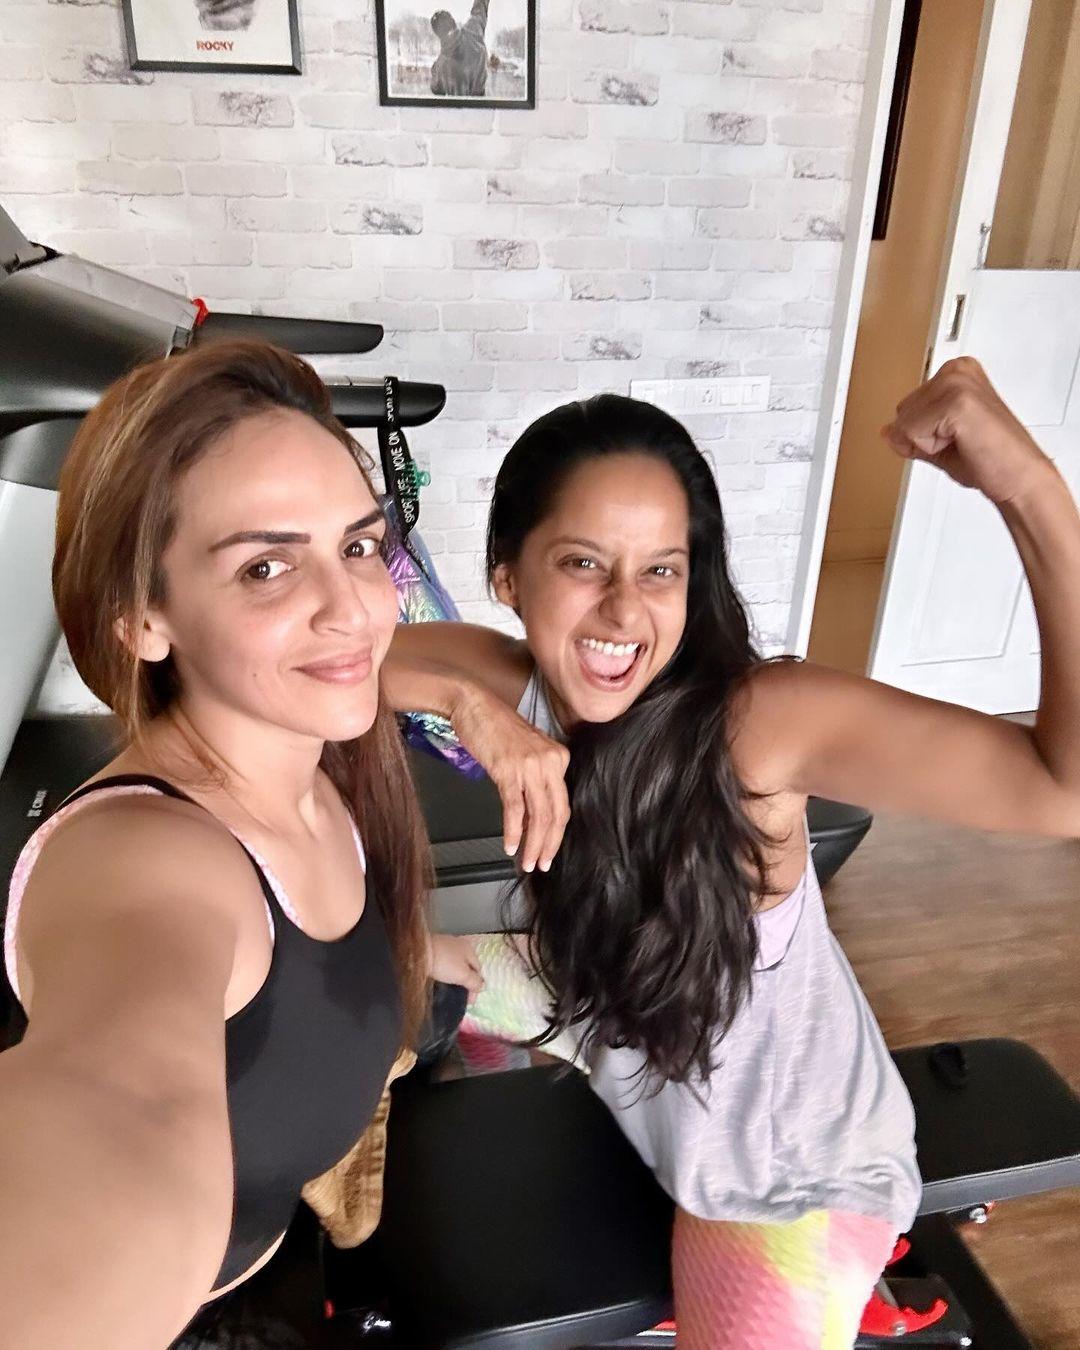 Sharing this selfie from the gym with her BFF, Esha wrote, 